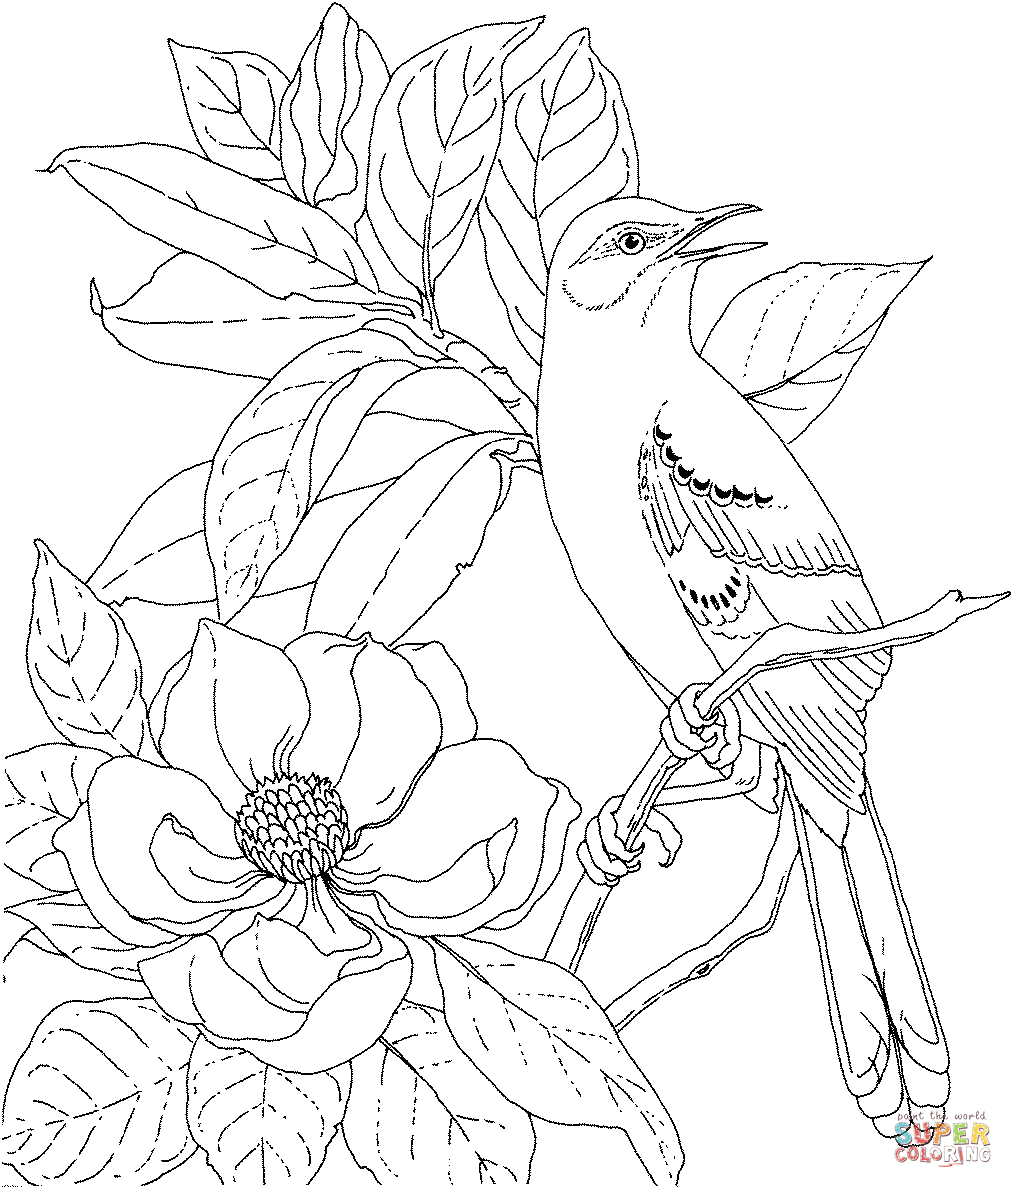 Mockingbird and Magnolia Mississippi State Bird and Flower Coloring Page